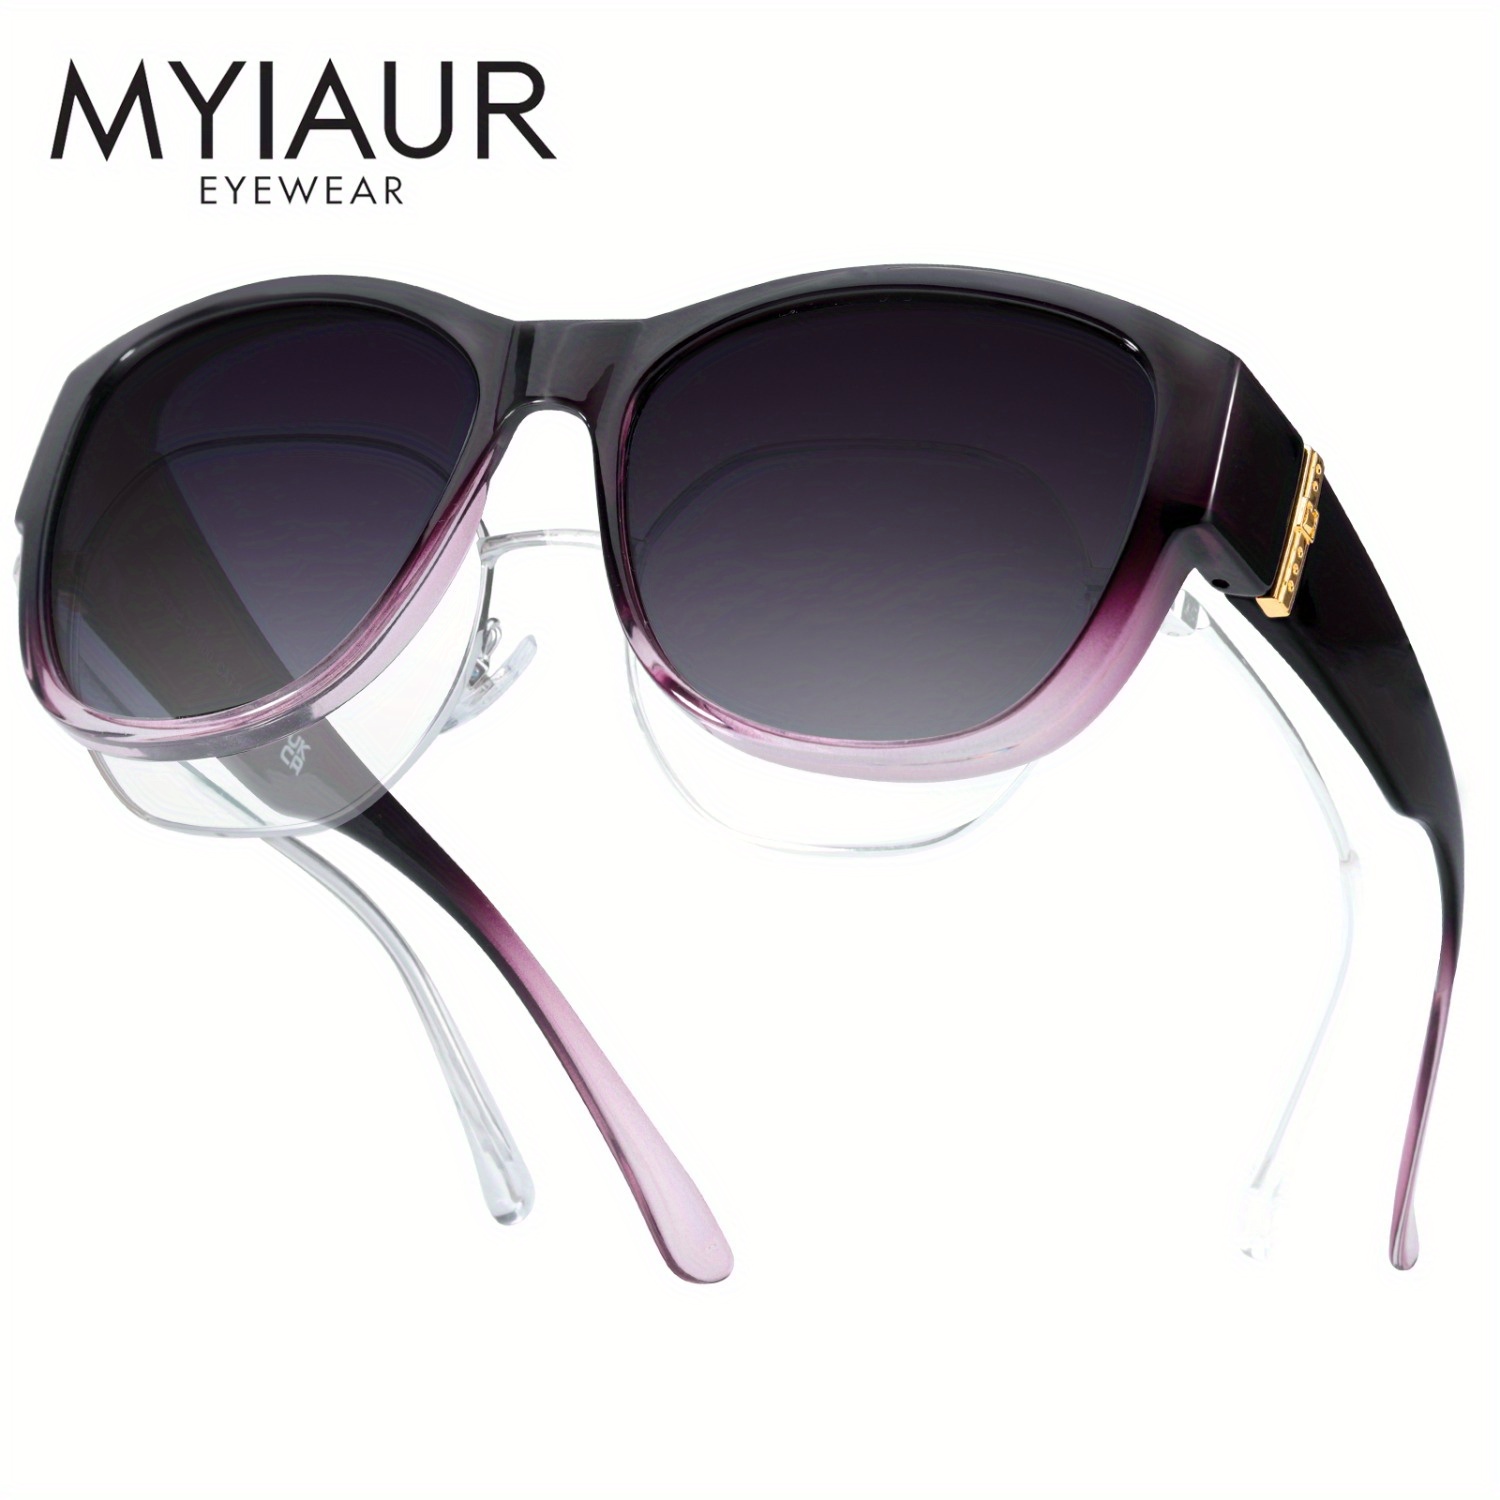 

Myiaur Polarized Fit Over Glasses, Over-glasses Wraparound Design, Trendy Eyewear With Tac Lenses, Sporty Style